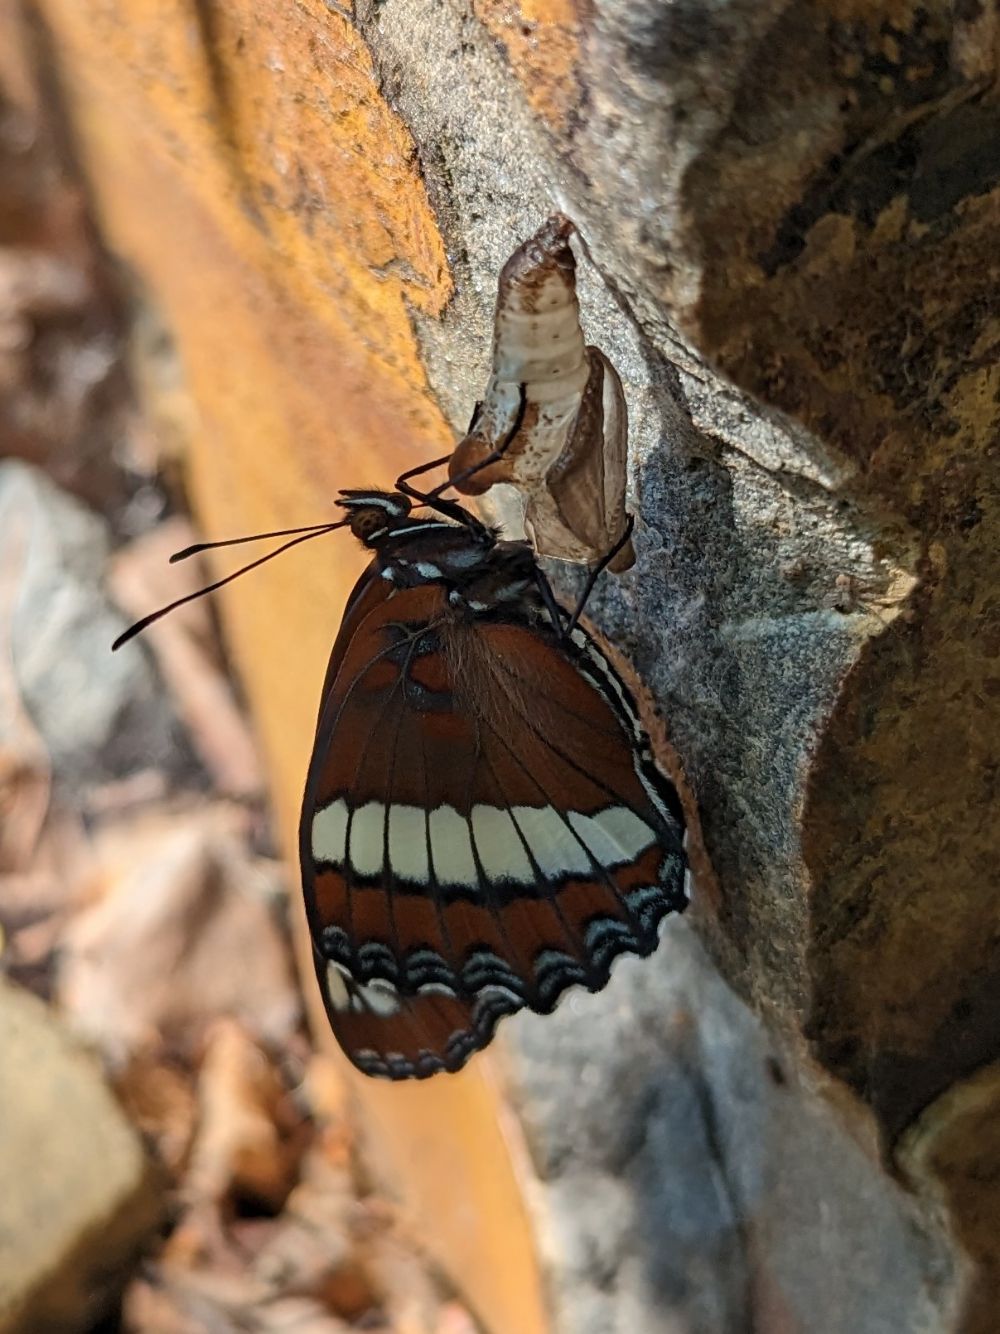 A newly emerged White Admiral butterfly hangs from it's cocoon that's been affixed to the side of a large rock in our garde.